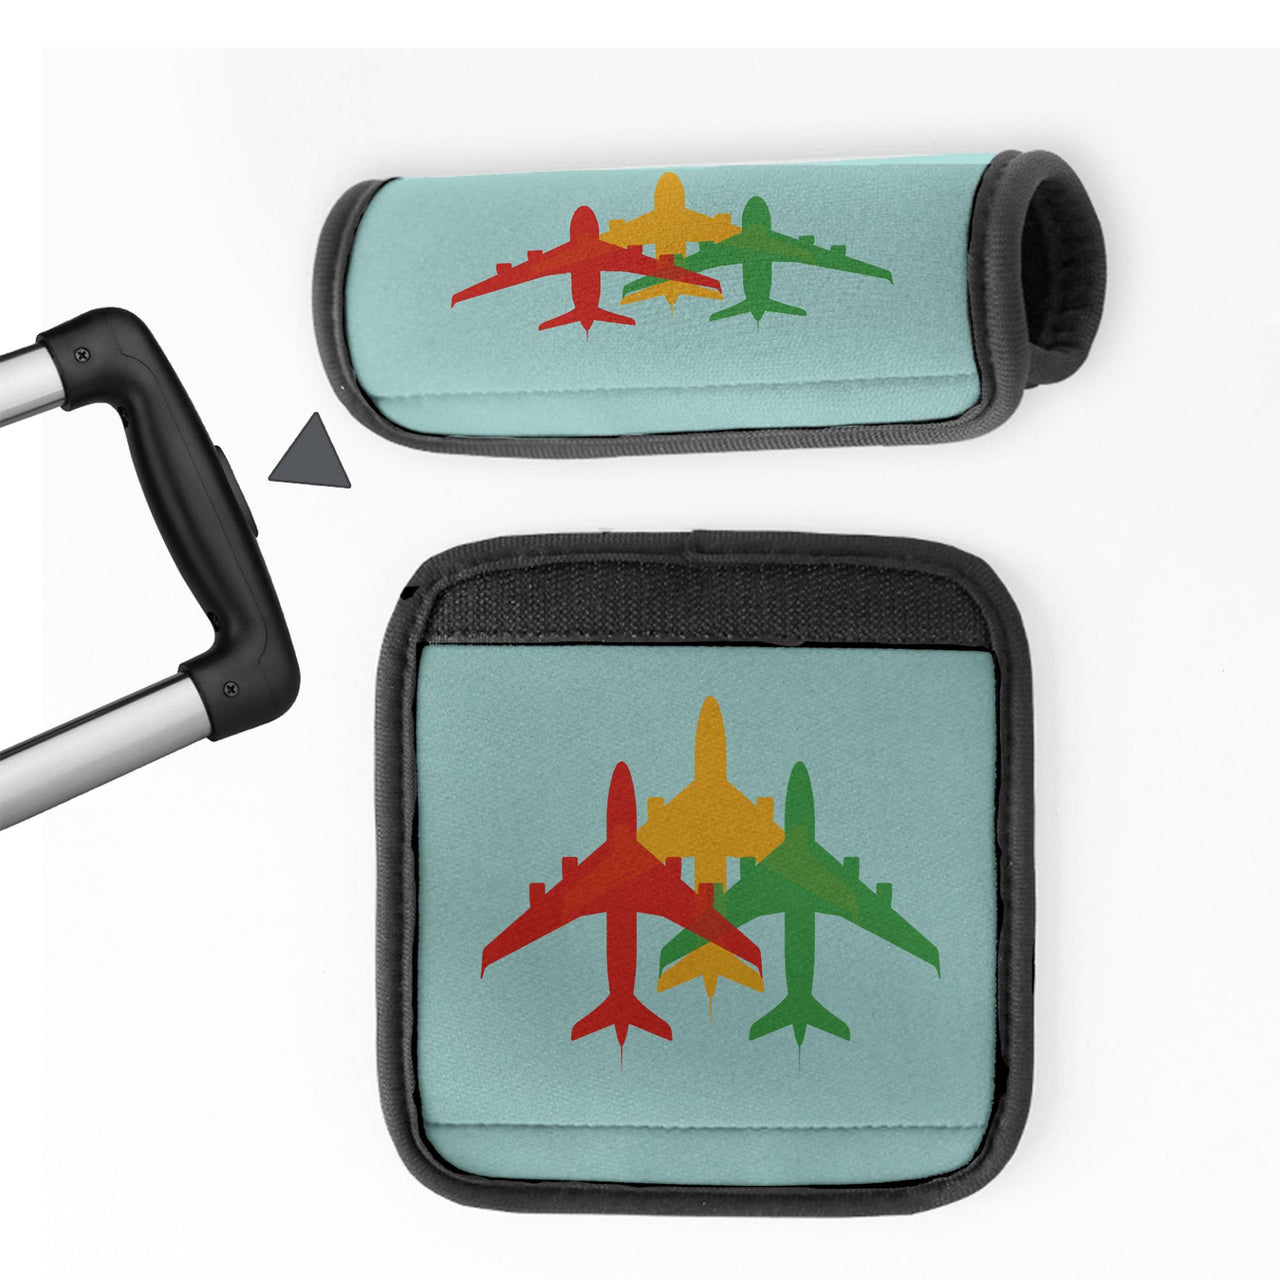 Colourful 3 Airplanes Designed Neoprene Luggage Handle Covers